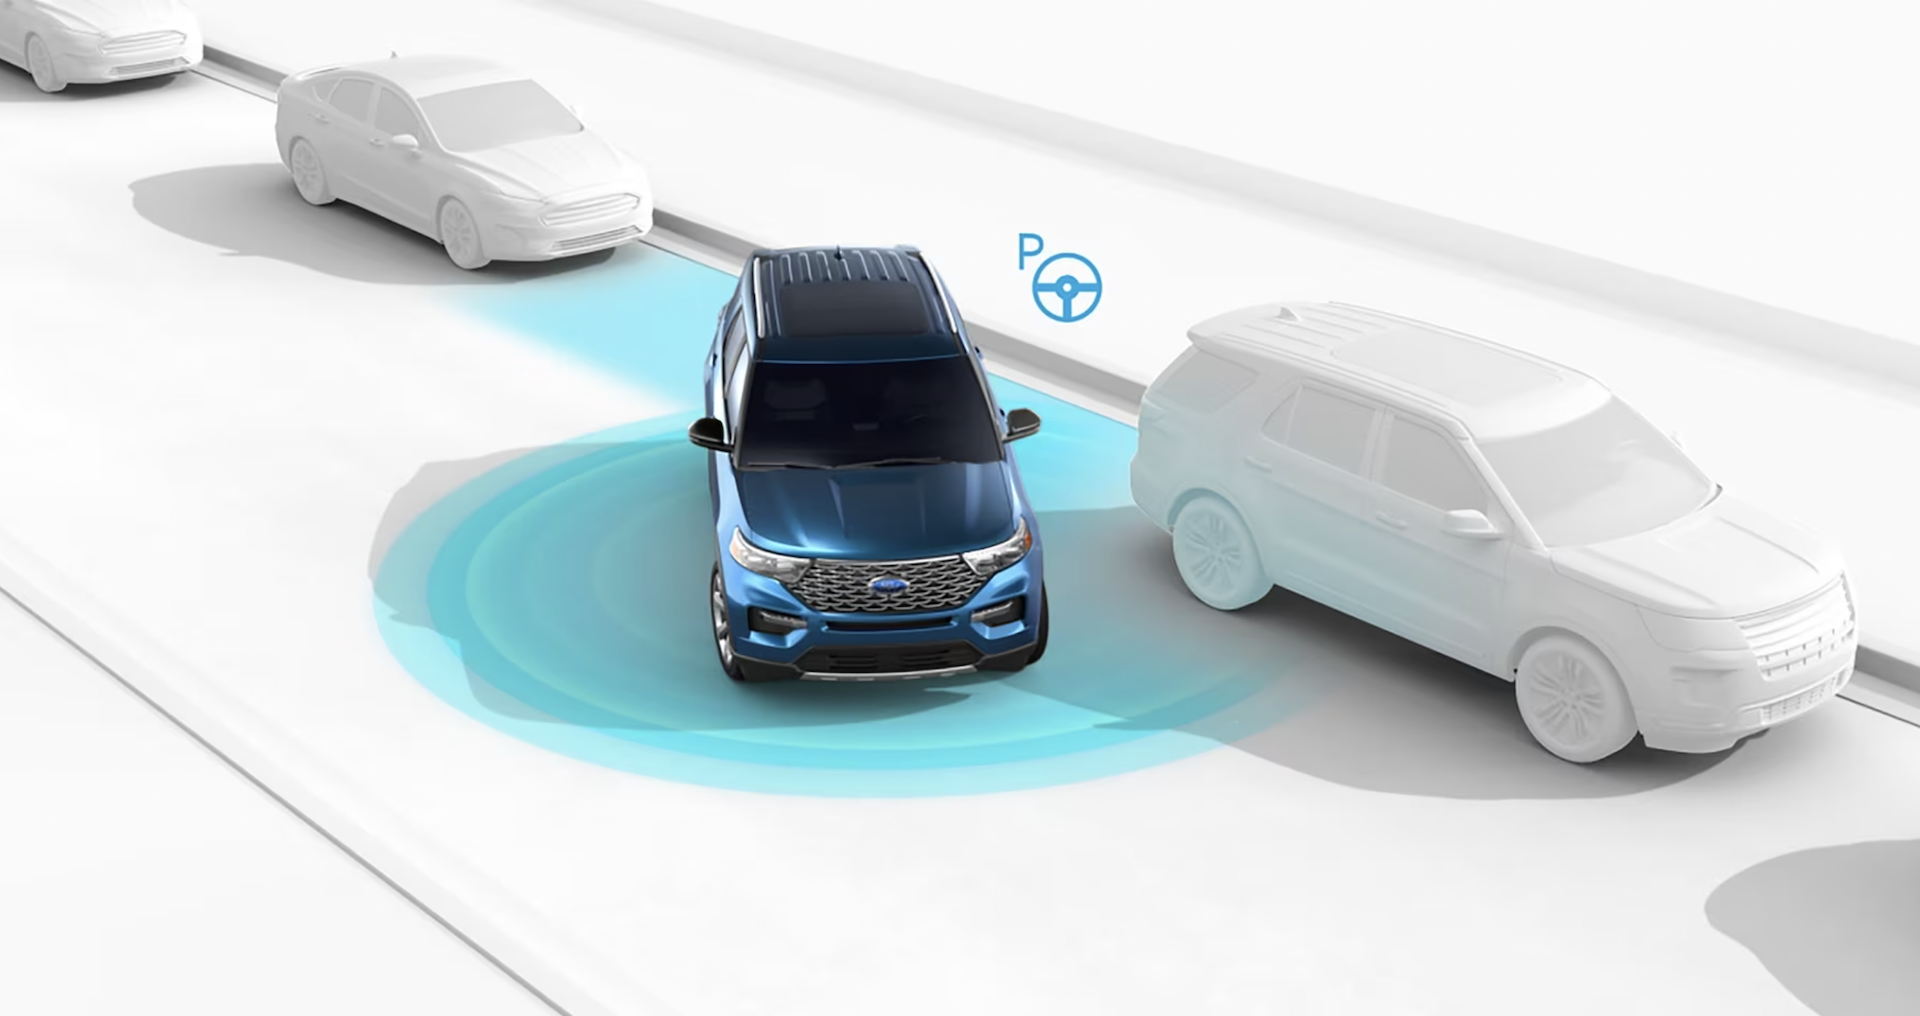 Autopilot and Mobileye Driver-Assist Systems Fooled by a Projector